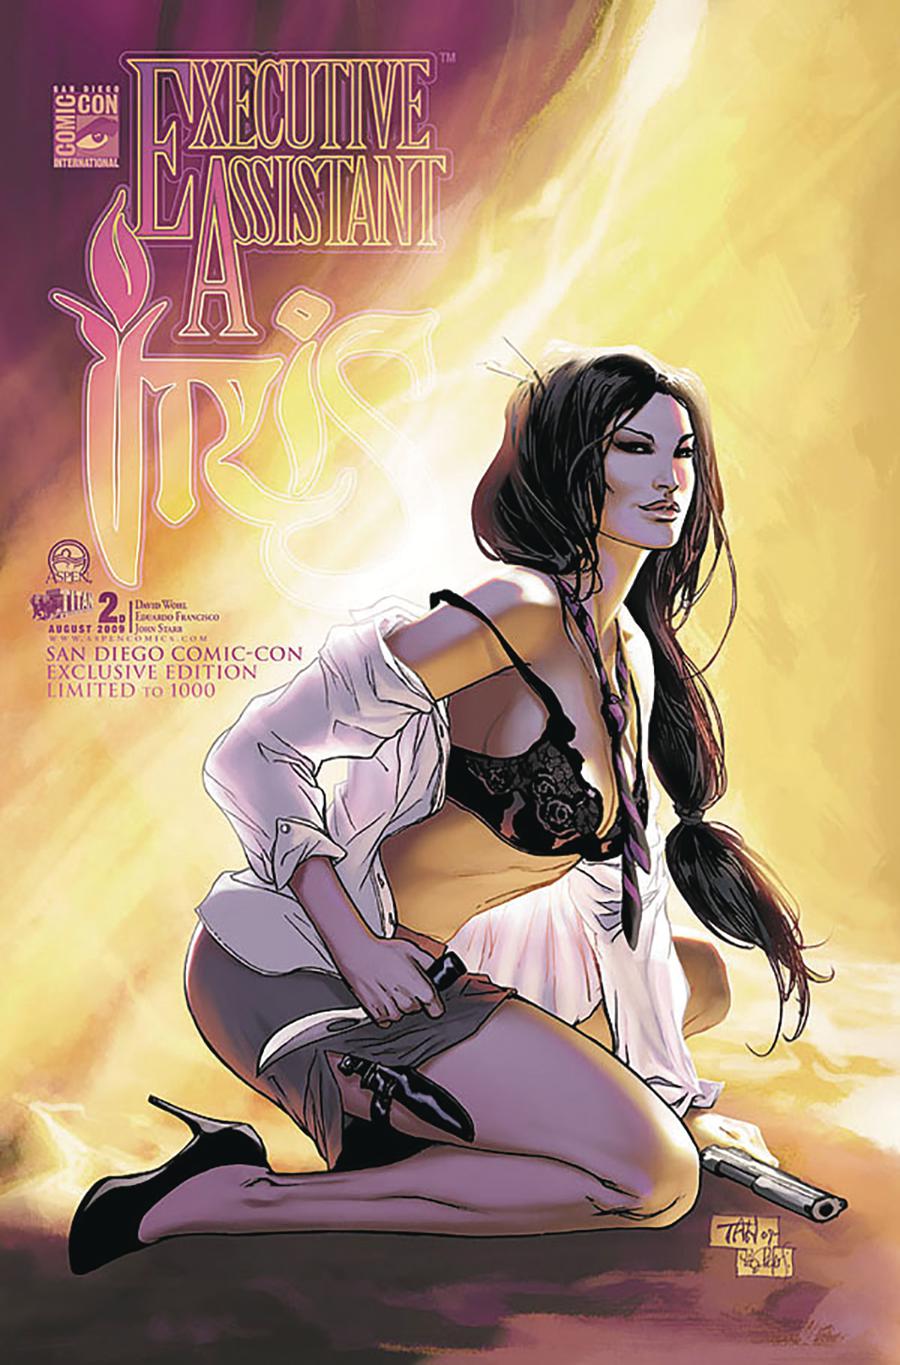 Executive Assistant Iris #2 Cover E San Diego Comic Con International 2009 Exclusive Billy Tan Variant Cover